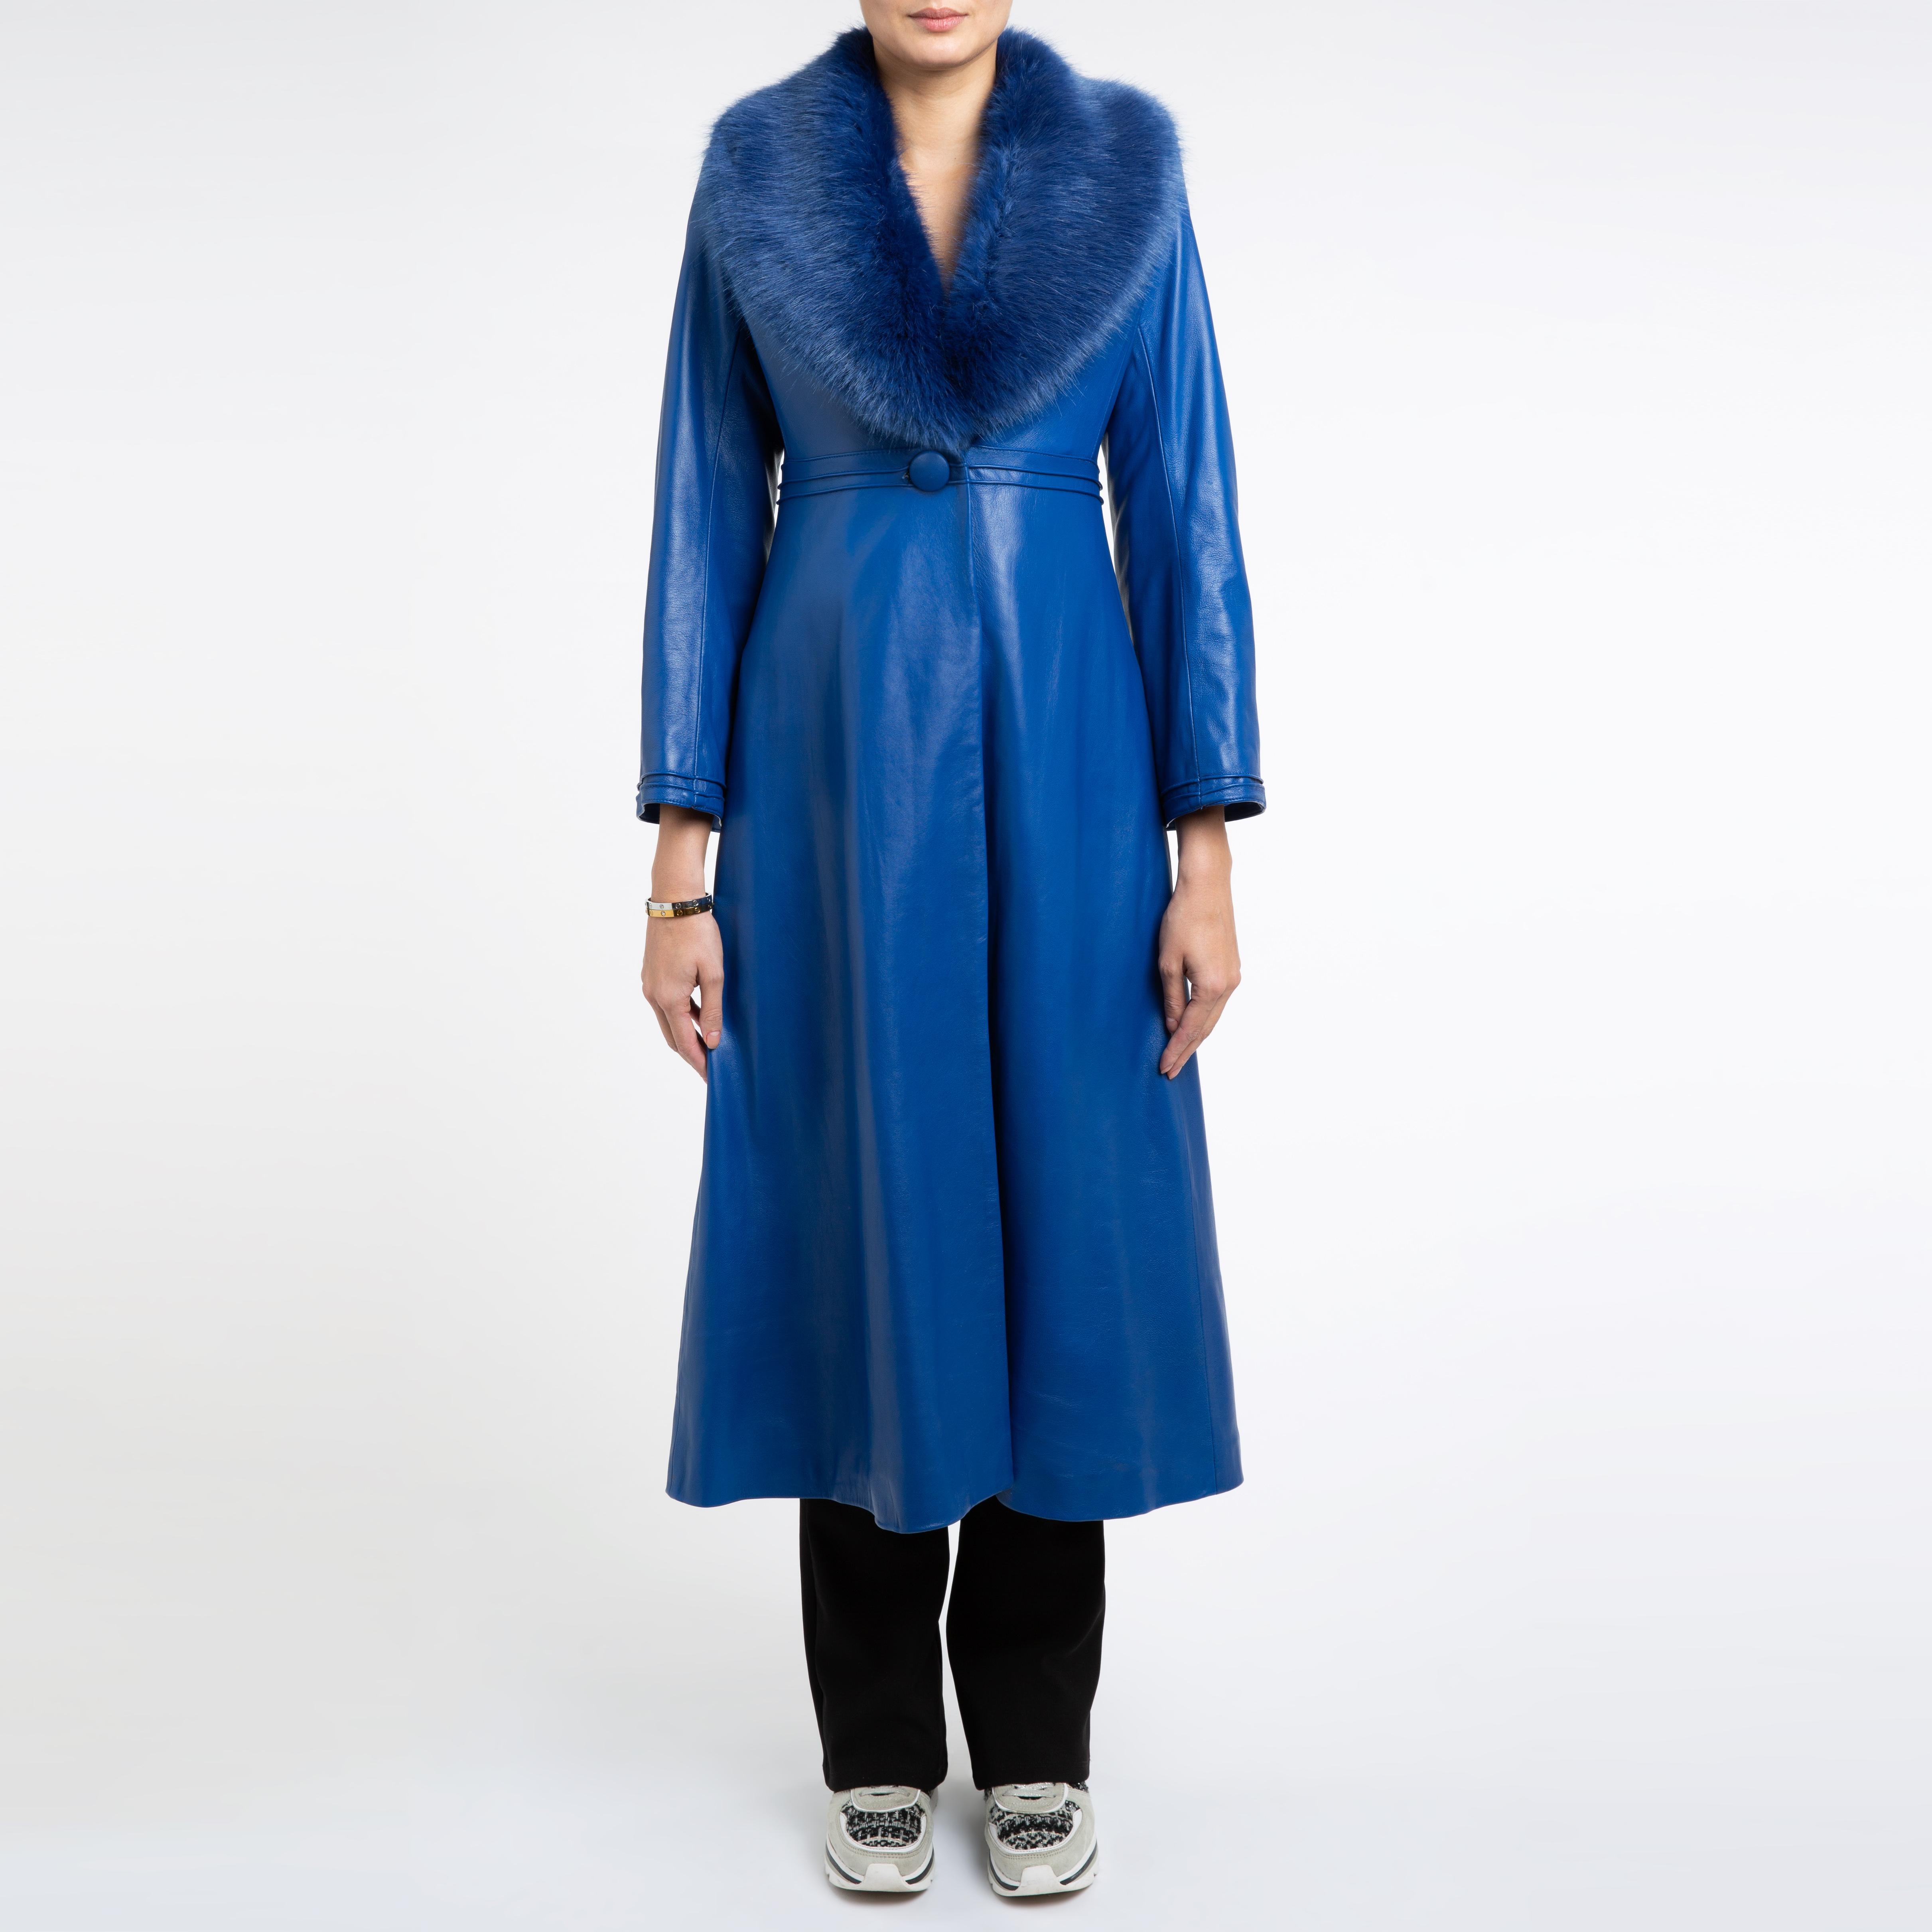 Verheyen London Edward Leather Coat in Blue with Faux Fur - Size uk 8 

The Edward Leather Coat created by Verheyen London is a romantic design inspired by the 1970s and Edwardian Era of Fashion.  A timeless design to be be worn for a lifetime and